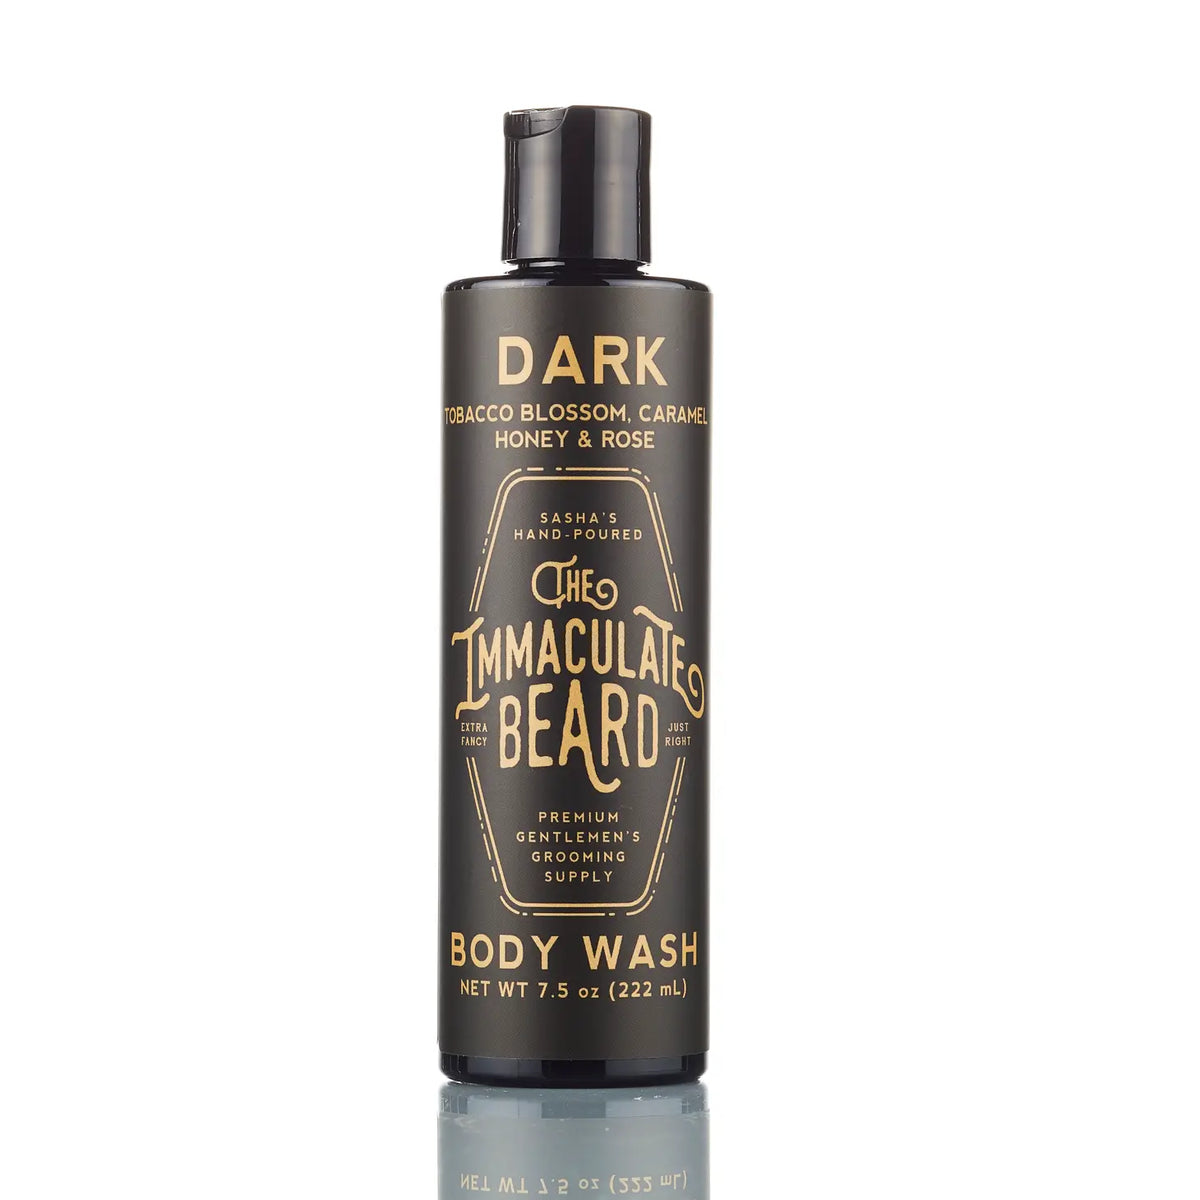 A black, tall, cylindrical bottle of "The Immaculate Beard" dark tobacco blossom, honey, and rose beard body wash. The container has white and gold text with a net weight of 7.